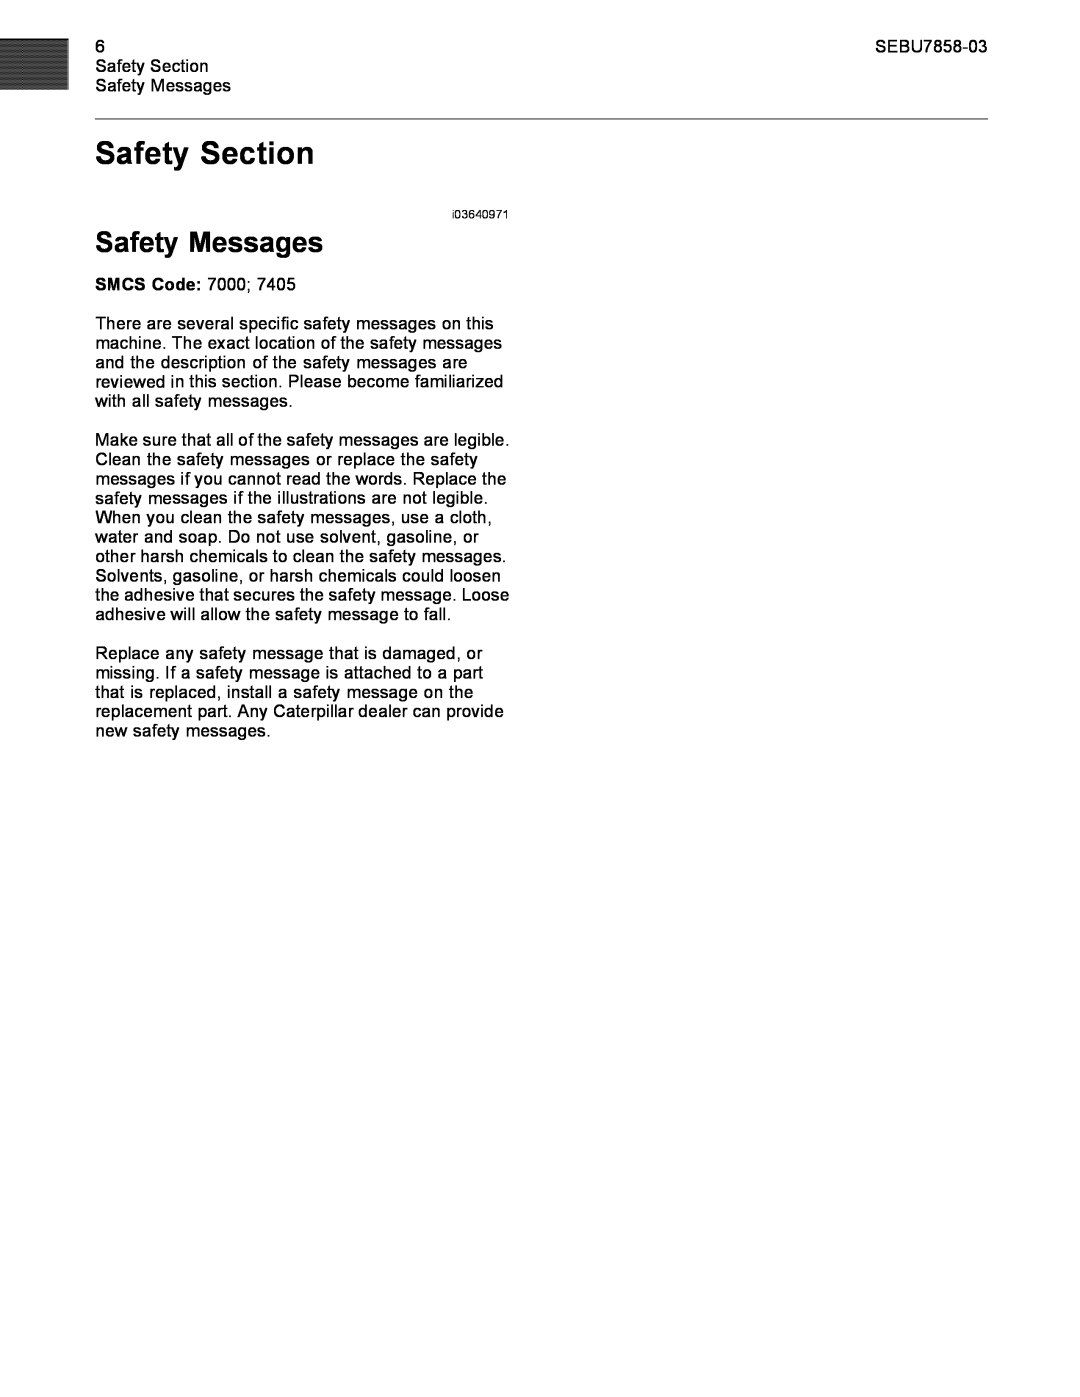 CAT 627G manual Safety Messages, Safety Section 